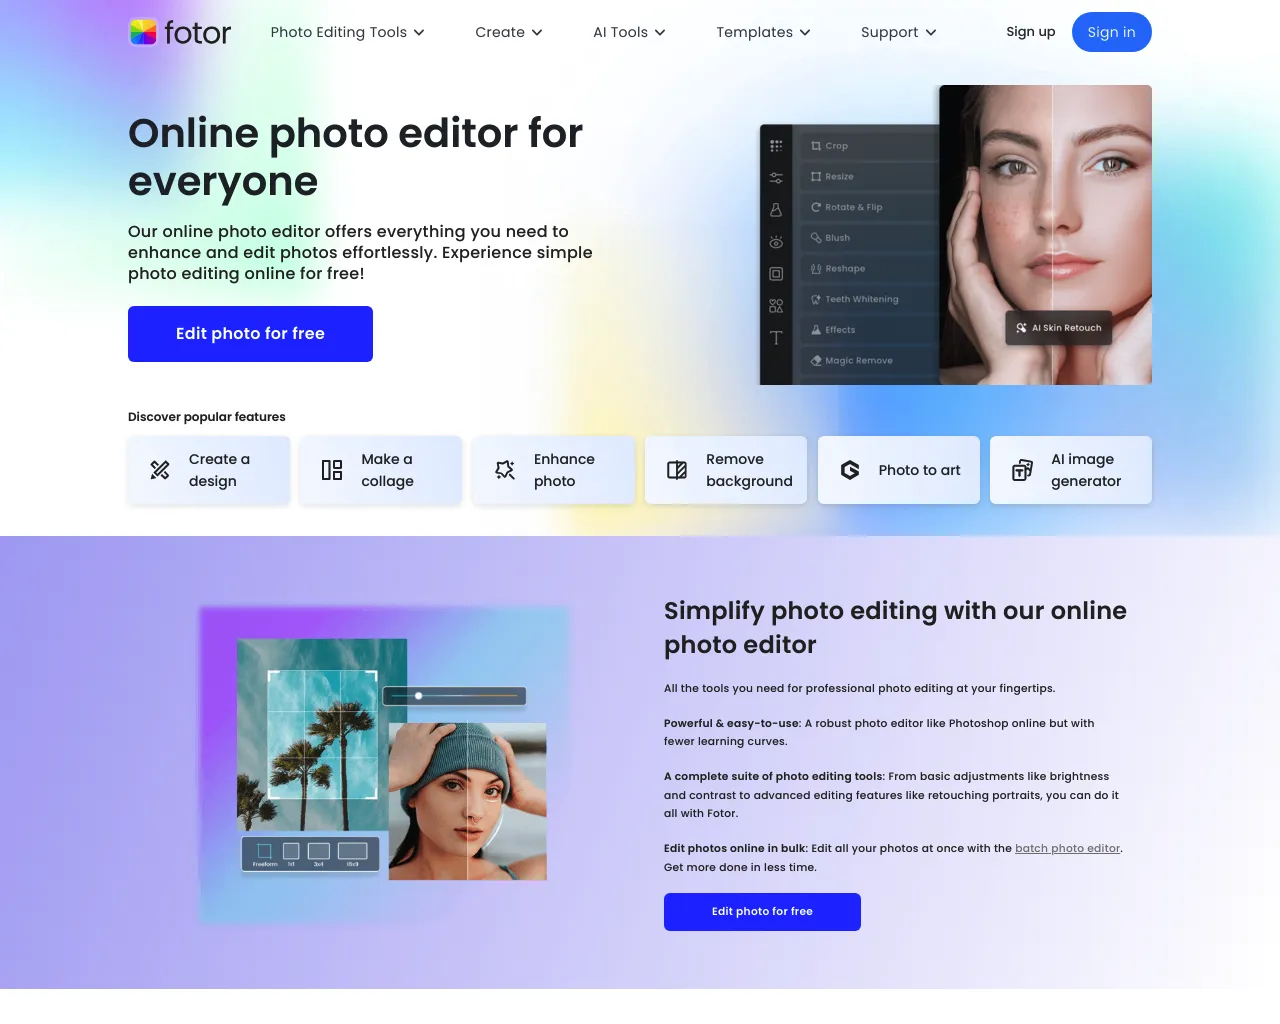 Fotor - Online photo editor for everyone. Edit photos faster and easier with AI